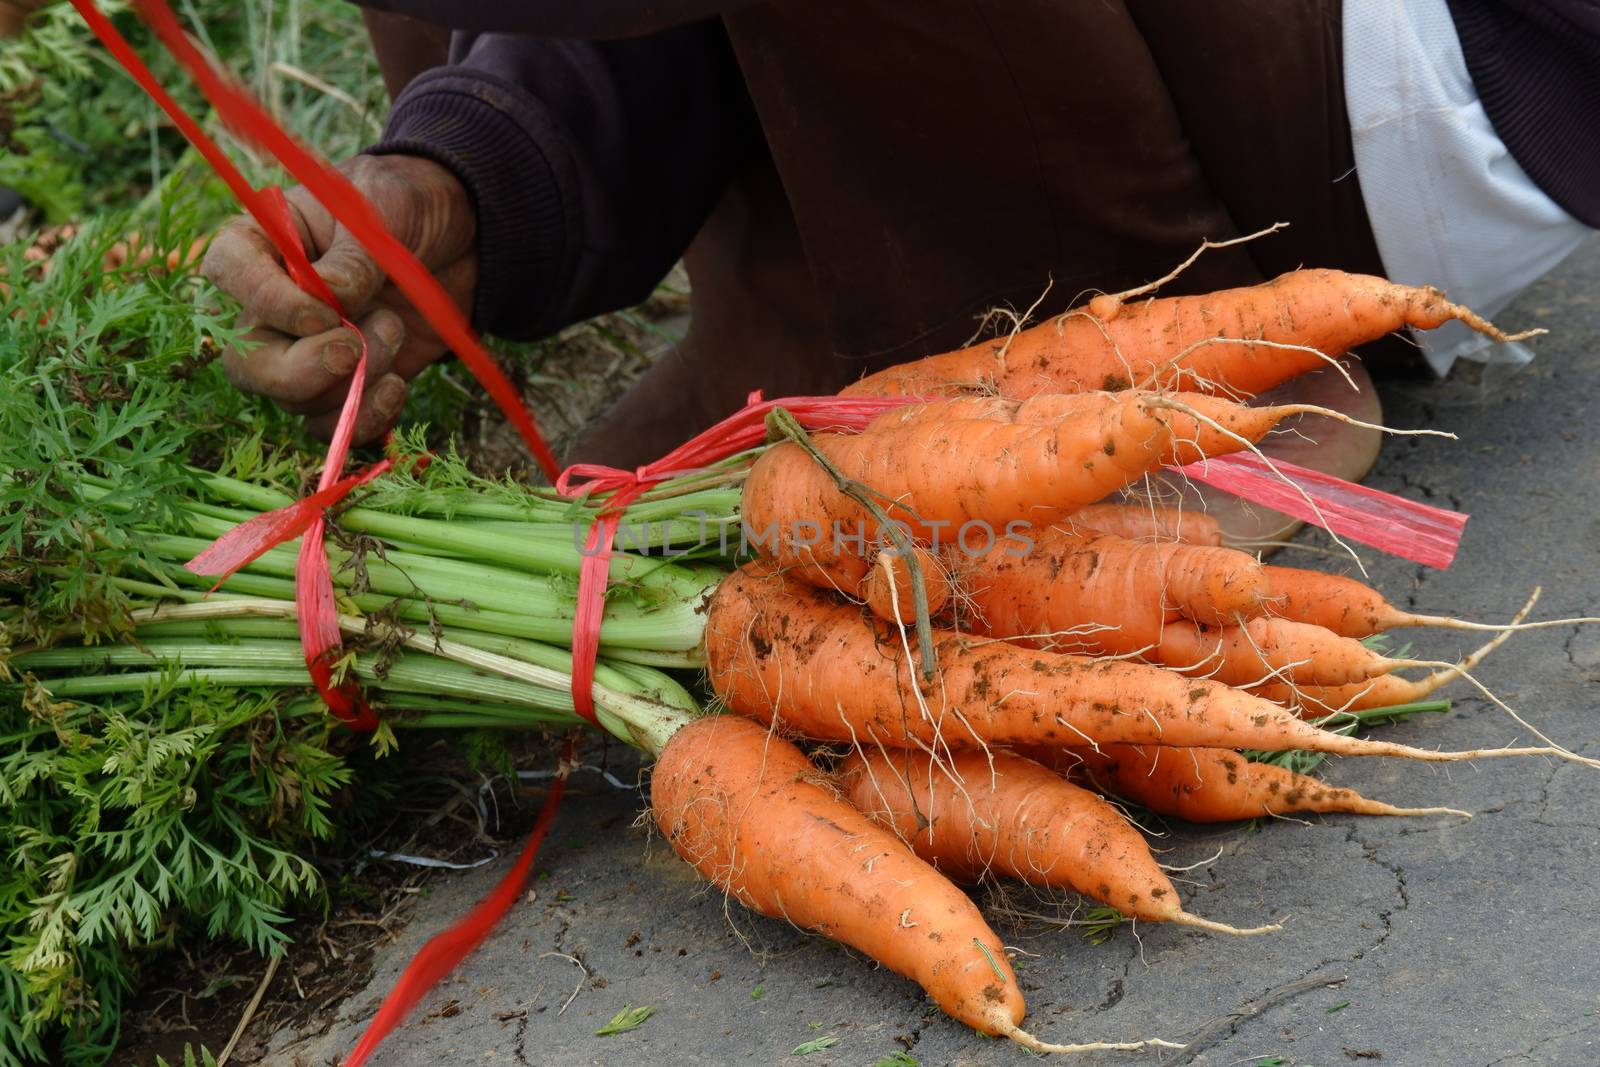 close up image of farmers harvest carrots in the fields, separate the carrots from the leaves and put them in sacks, harvest big carrots and tie them. out of focus